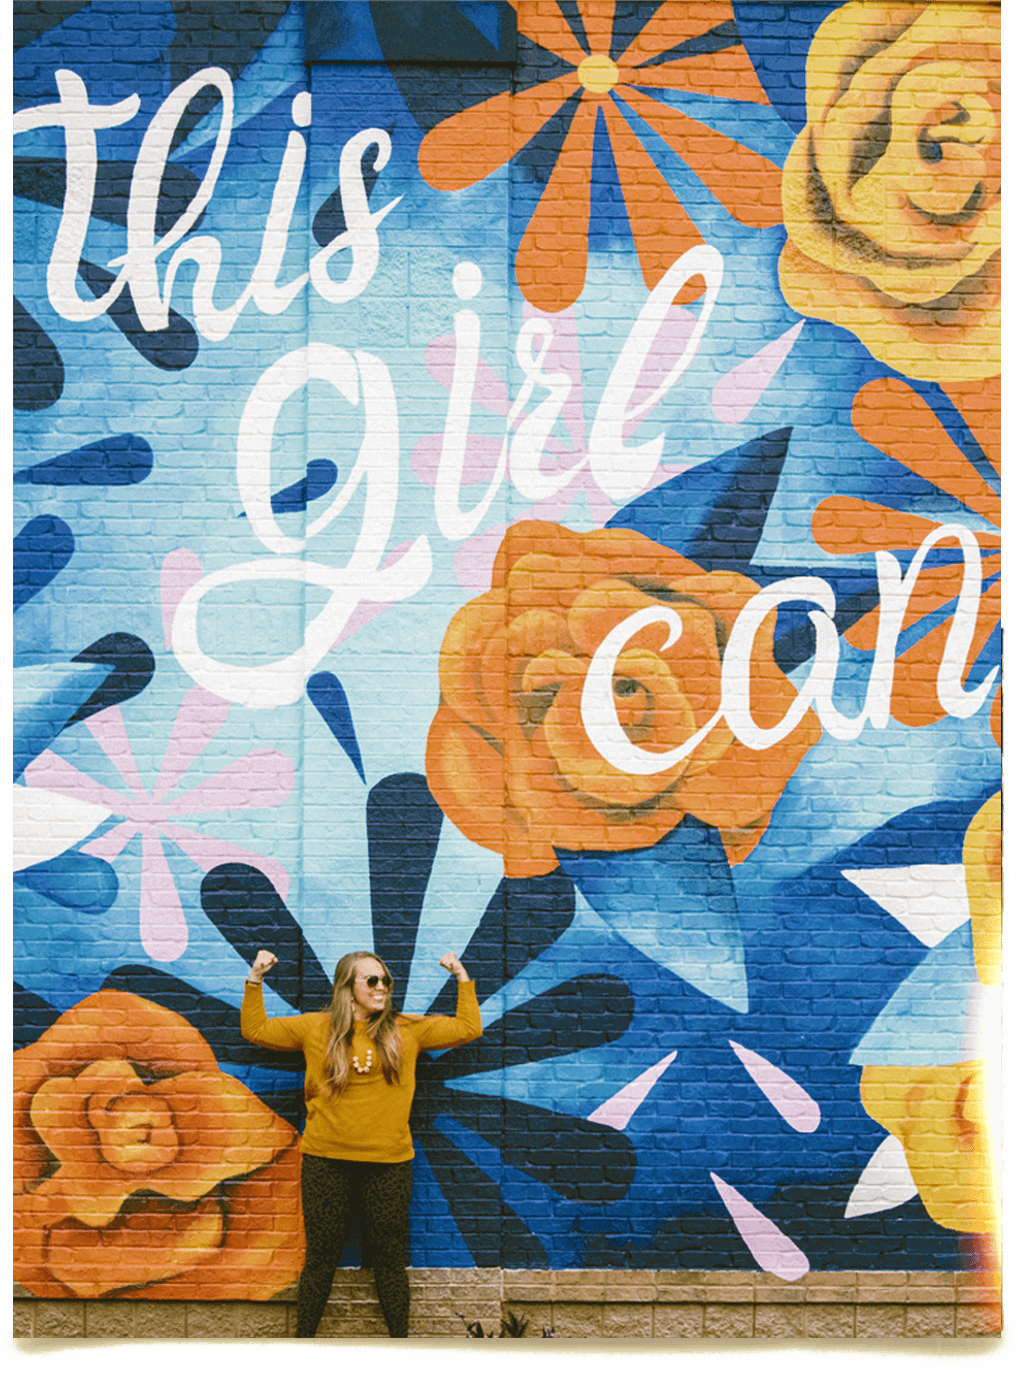 woman strong pose with art mural written this girl can